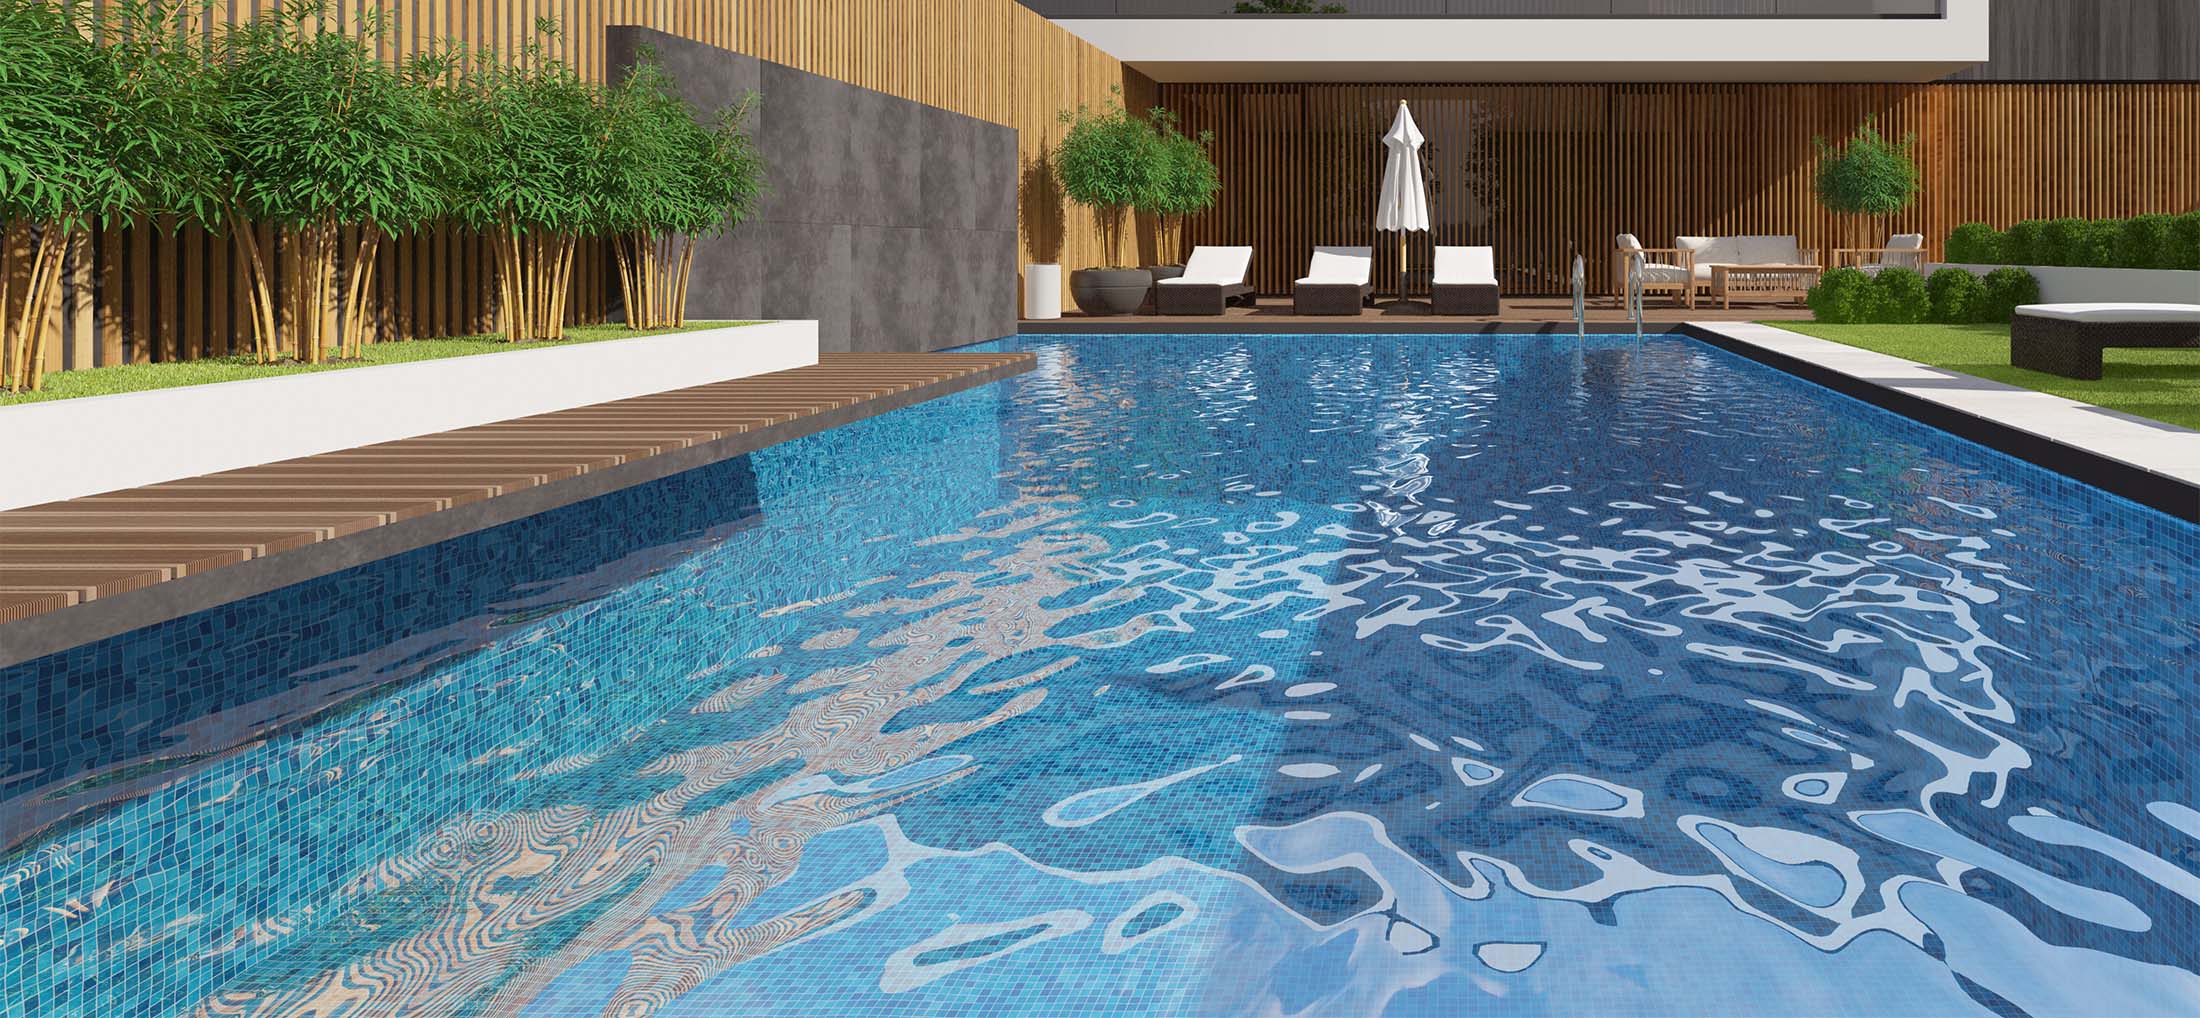 Does Your Pool Need Renovation?